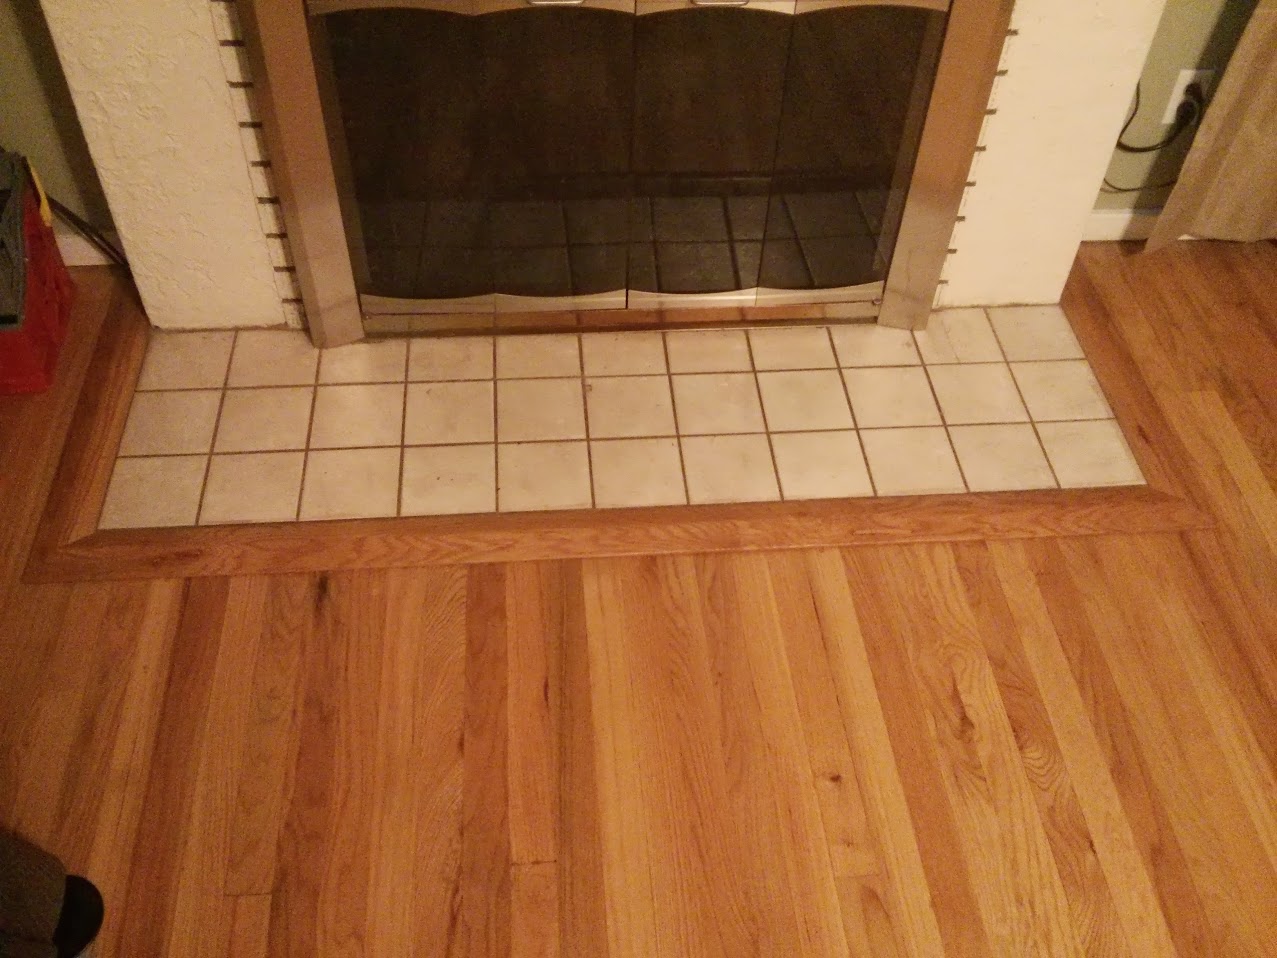 This floor had tile over the original hardwood flooring.  After removing the carpet I refinished the floor and installed this threshold to clean up the transition to the refinished hardwood floor.